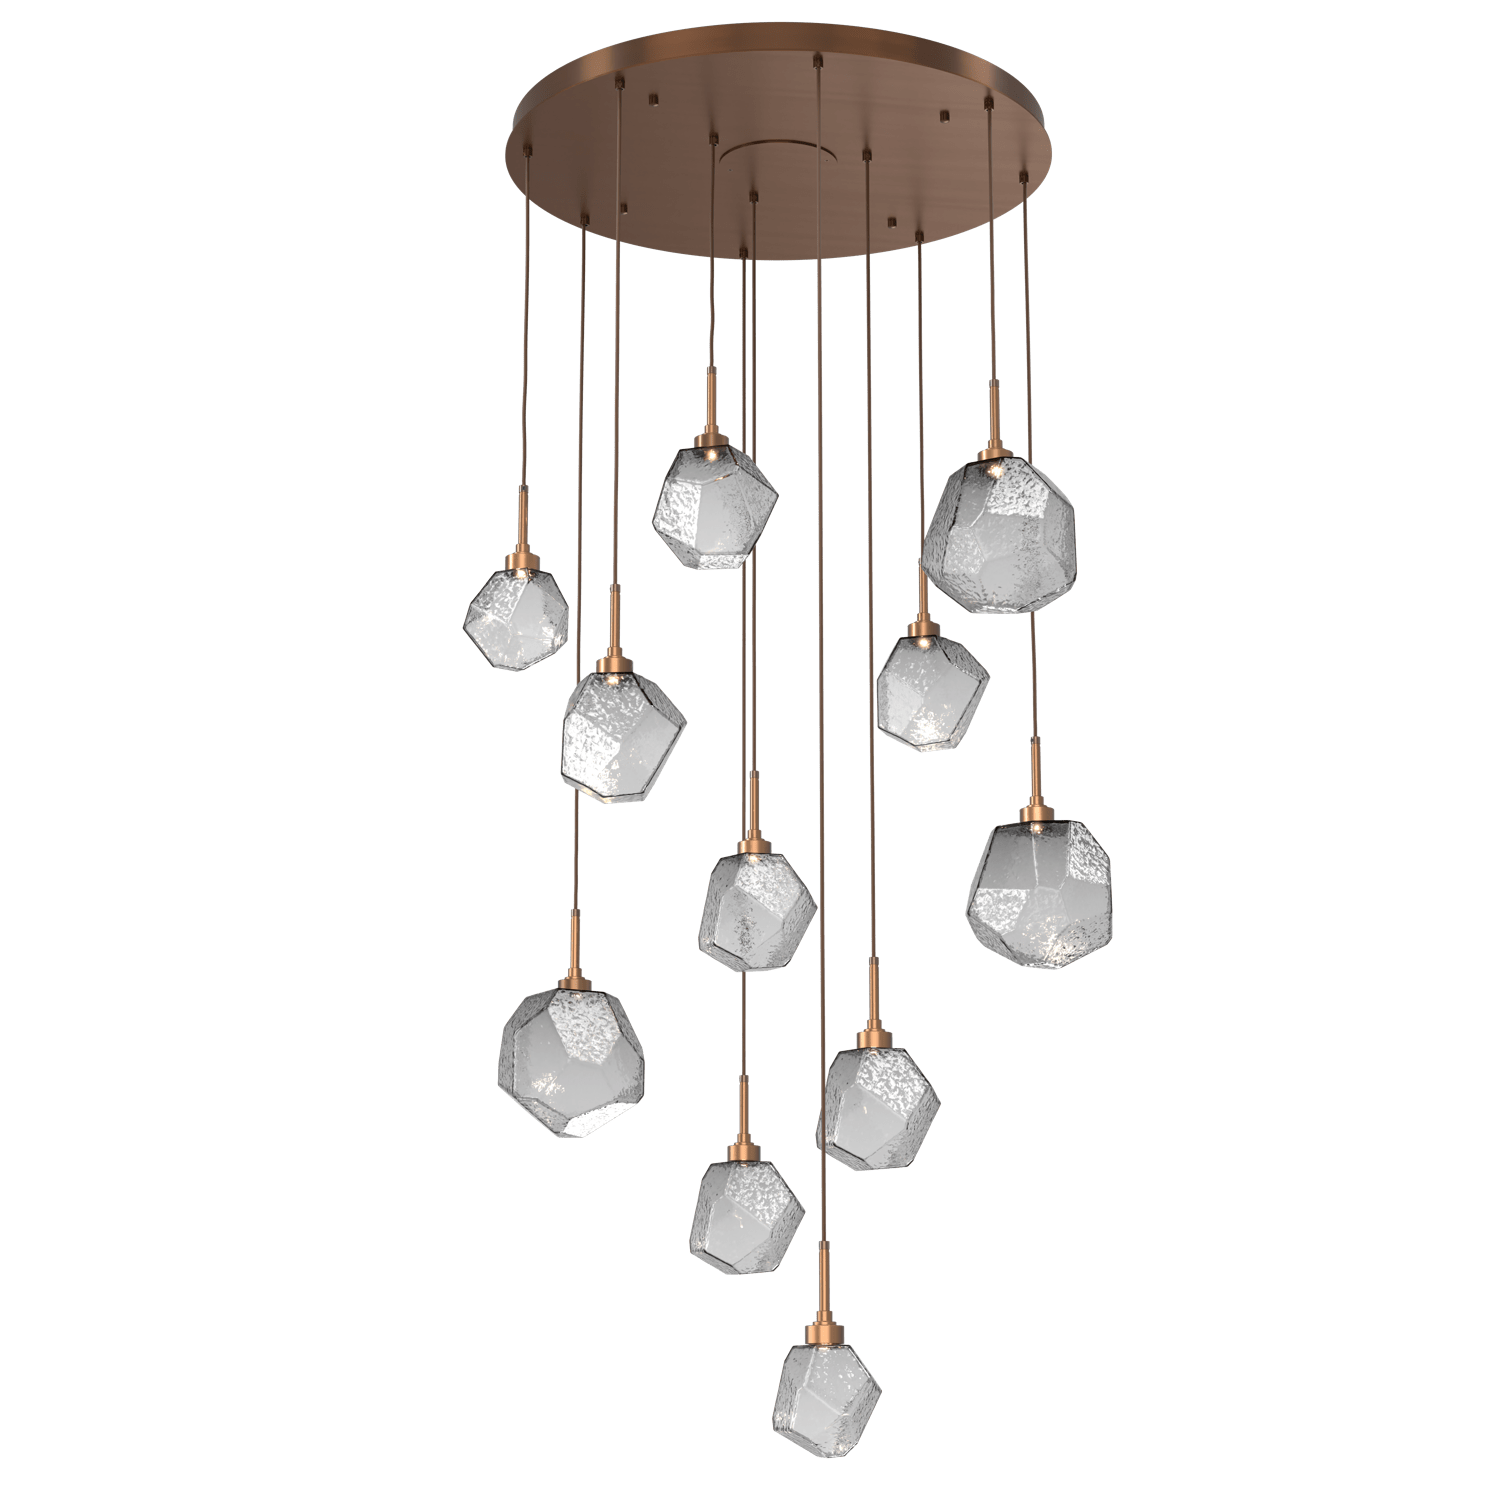 CHB0039-11-RB-S-Hammerton-Studio-Gem-11-light-round-pendant-chandelier-with-oil-rubbed-bronze-finish-and-smoke-blown-glass-shades-and-LED-lamping